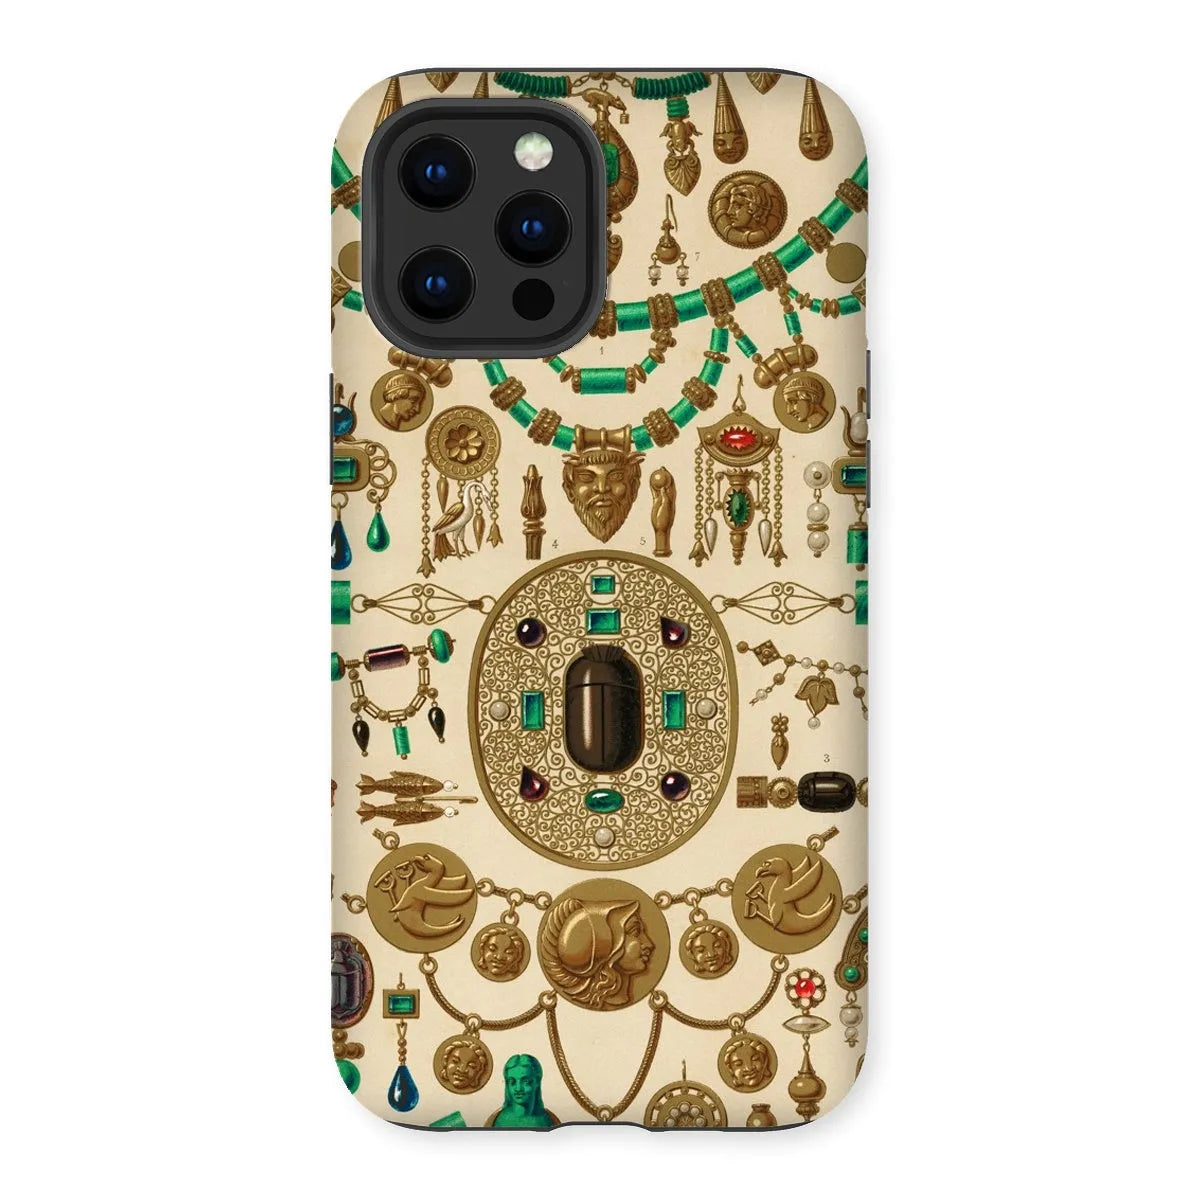 Etruscan Patterns From L’ornement Polychrome By Auguste Racinet Tough Phone Case - Iphone 12 Pro Max / Matte - Mobile